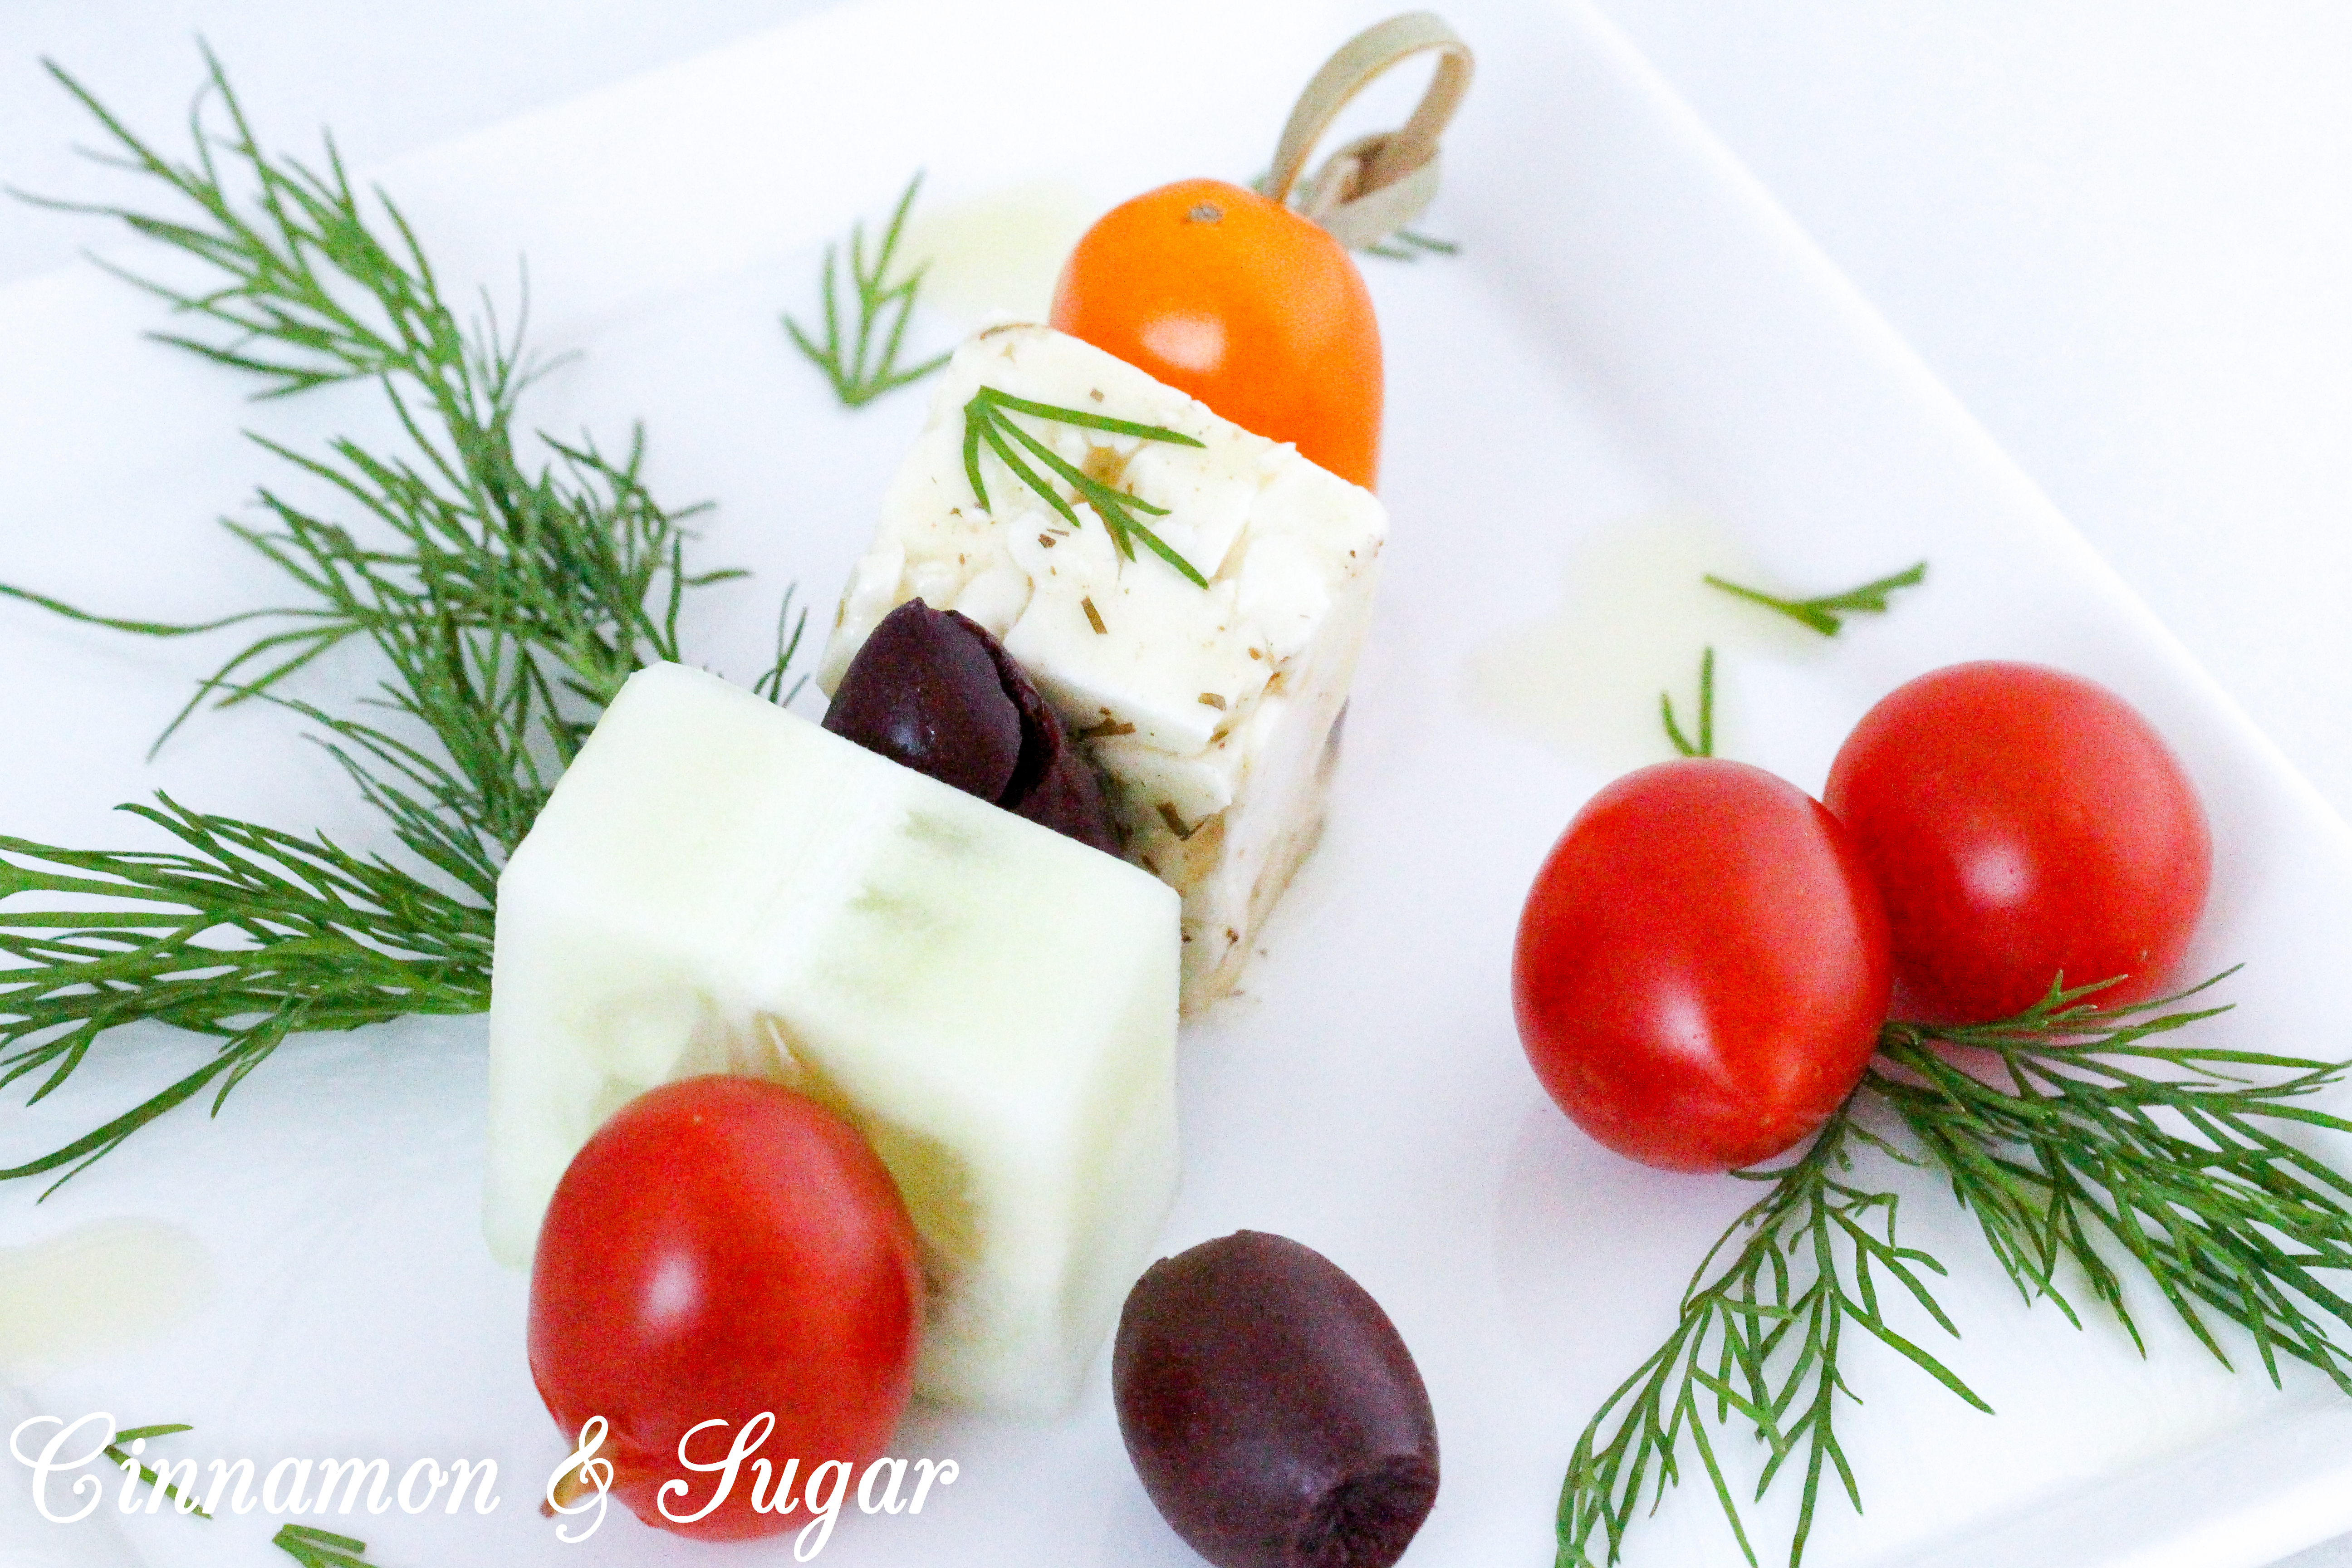 Light and refreshing, Greek Salad Skewers are mini appetizers that are quick to make and provide a fun, healthy way to satisfy pre-dinner appetites. Recipe shared with permission granted by Jenn McKinlay, author of WORD TO THE WISE.